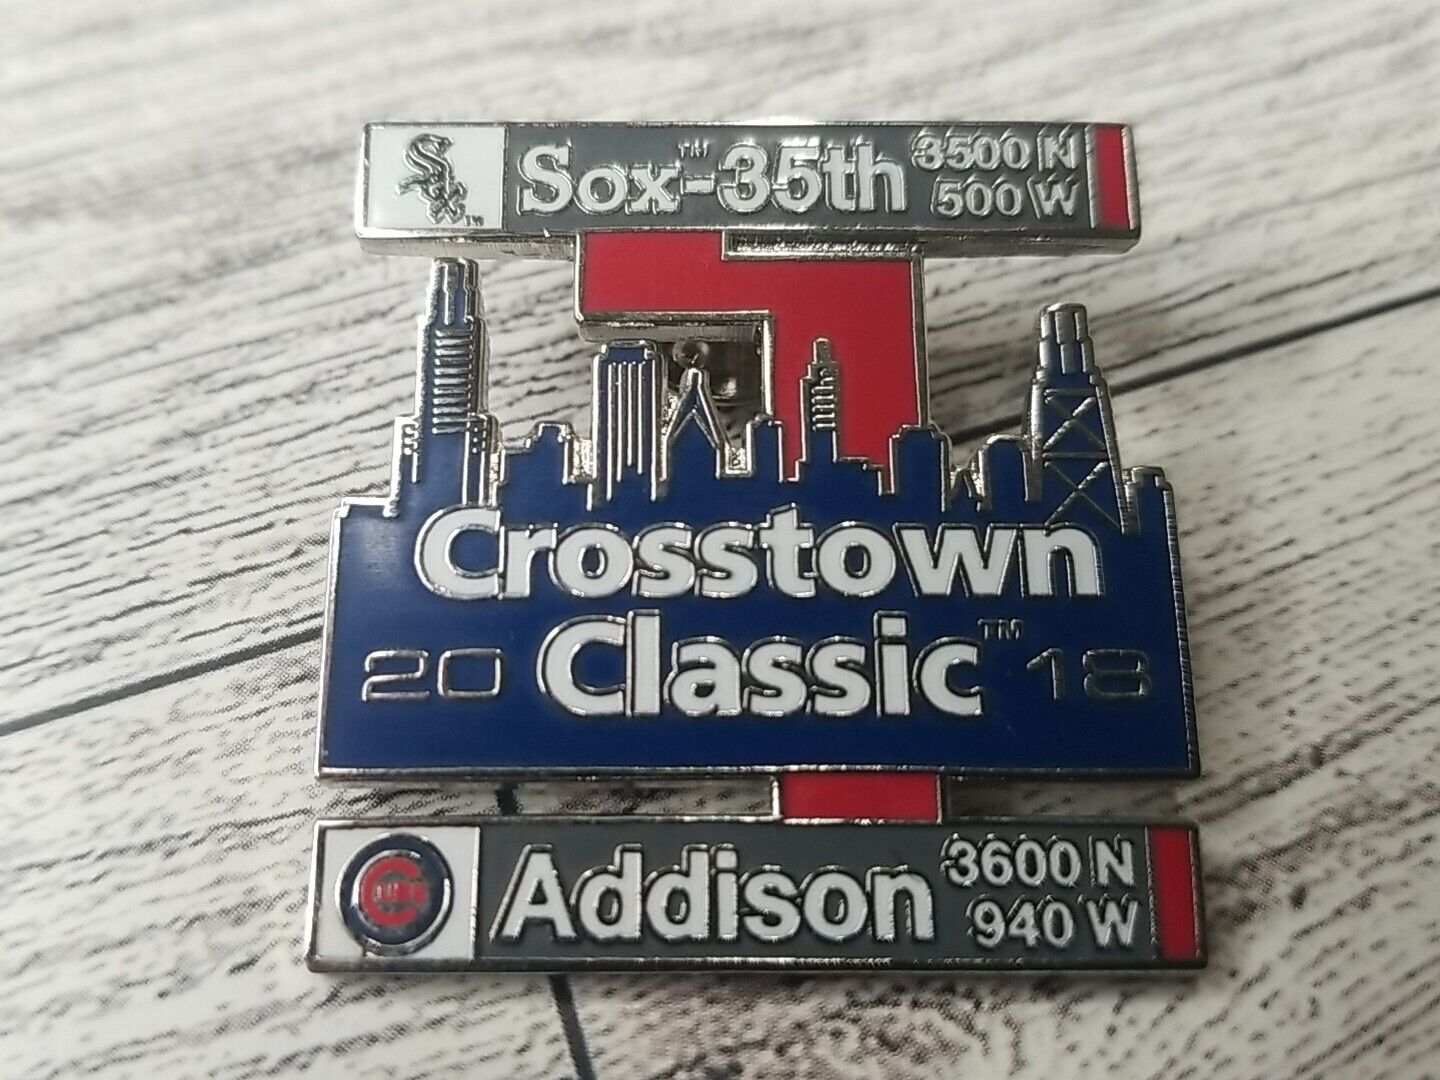 Chicago Cubs Vs. White Sox Crosstown Classic 2018 MLB Collectable Lapel Hat Pin